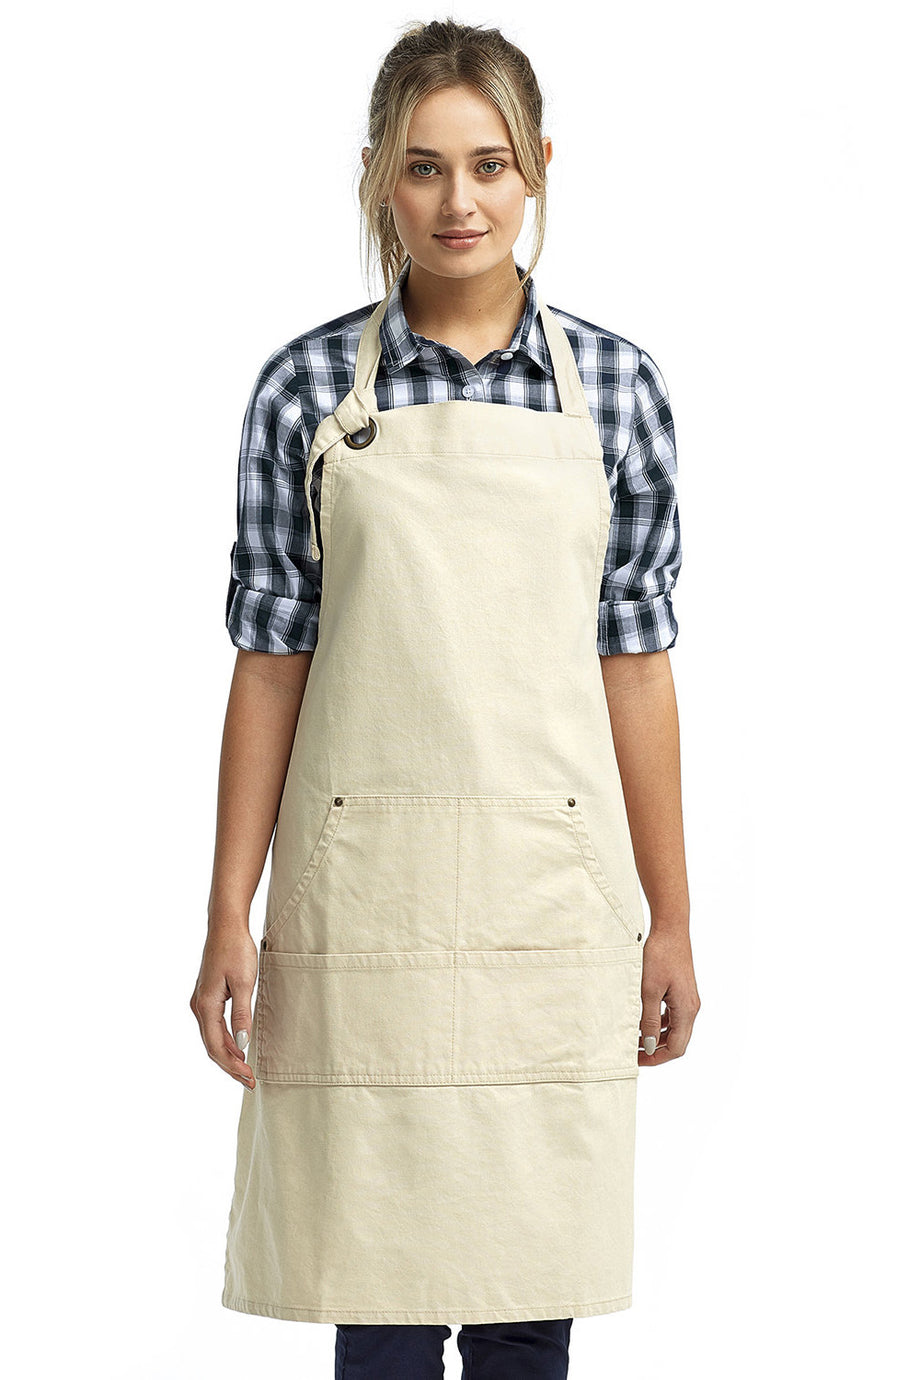 Artisan Collection by Reprime Natural Bib Adjustable Apron (4 Pocket Pouch)